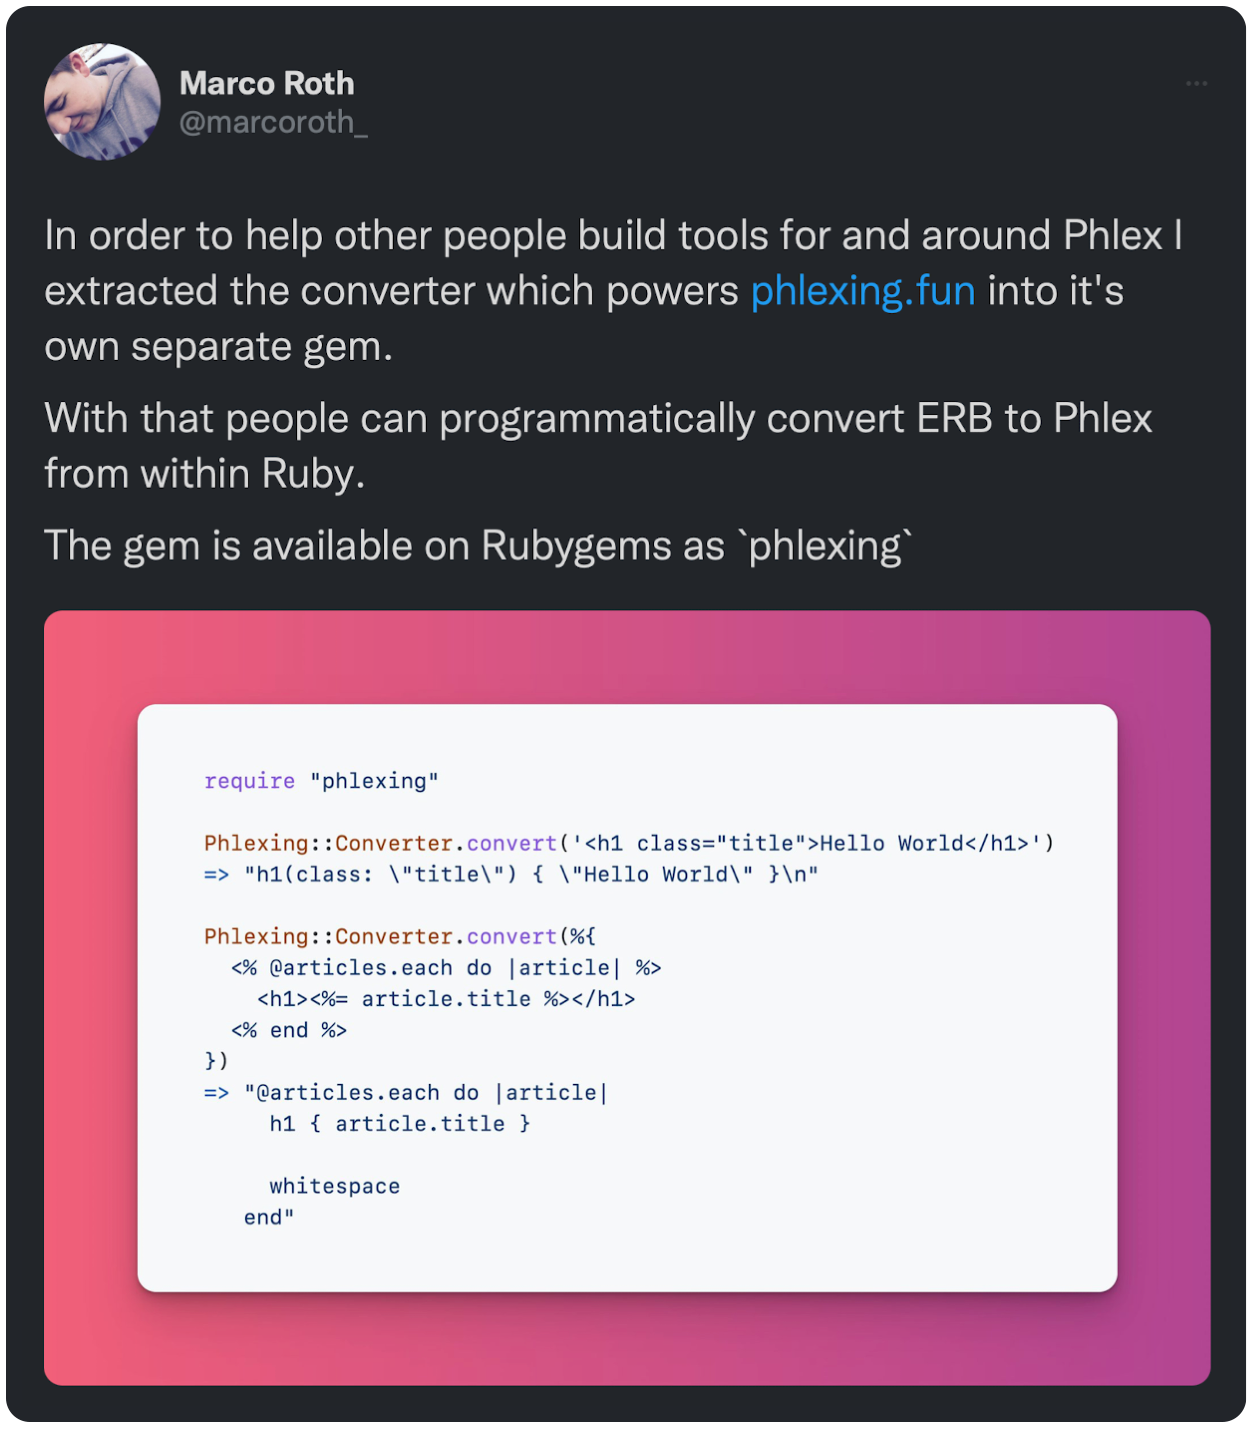 n order to help other people build tools for and around Phlex I extracted the converter which powers https://t.co/5fqGw8sbPZ into it's own separate gem. With that people can programmatically convert ERB to Phlex from within Ruby. The gem is available on Rubygems as `phlexing`